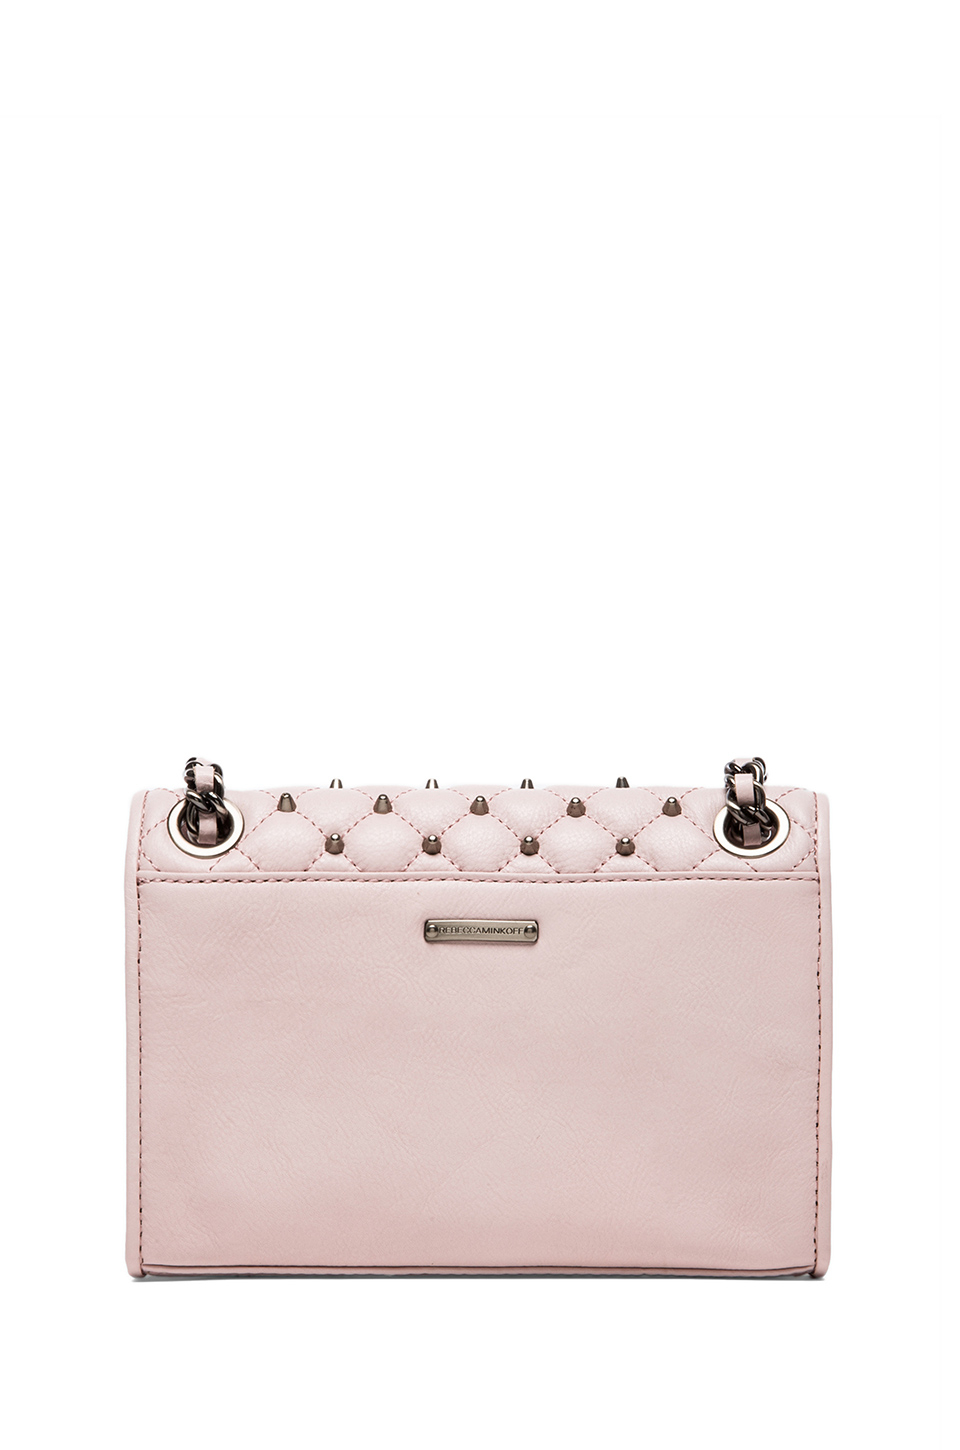 Lyst - Rebecca Minkoff Quilted Mini Affair with Studs in Pink